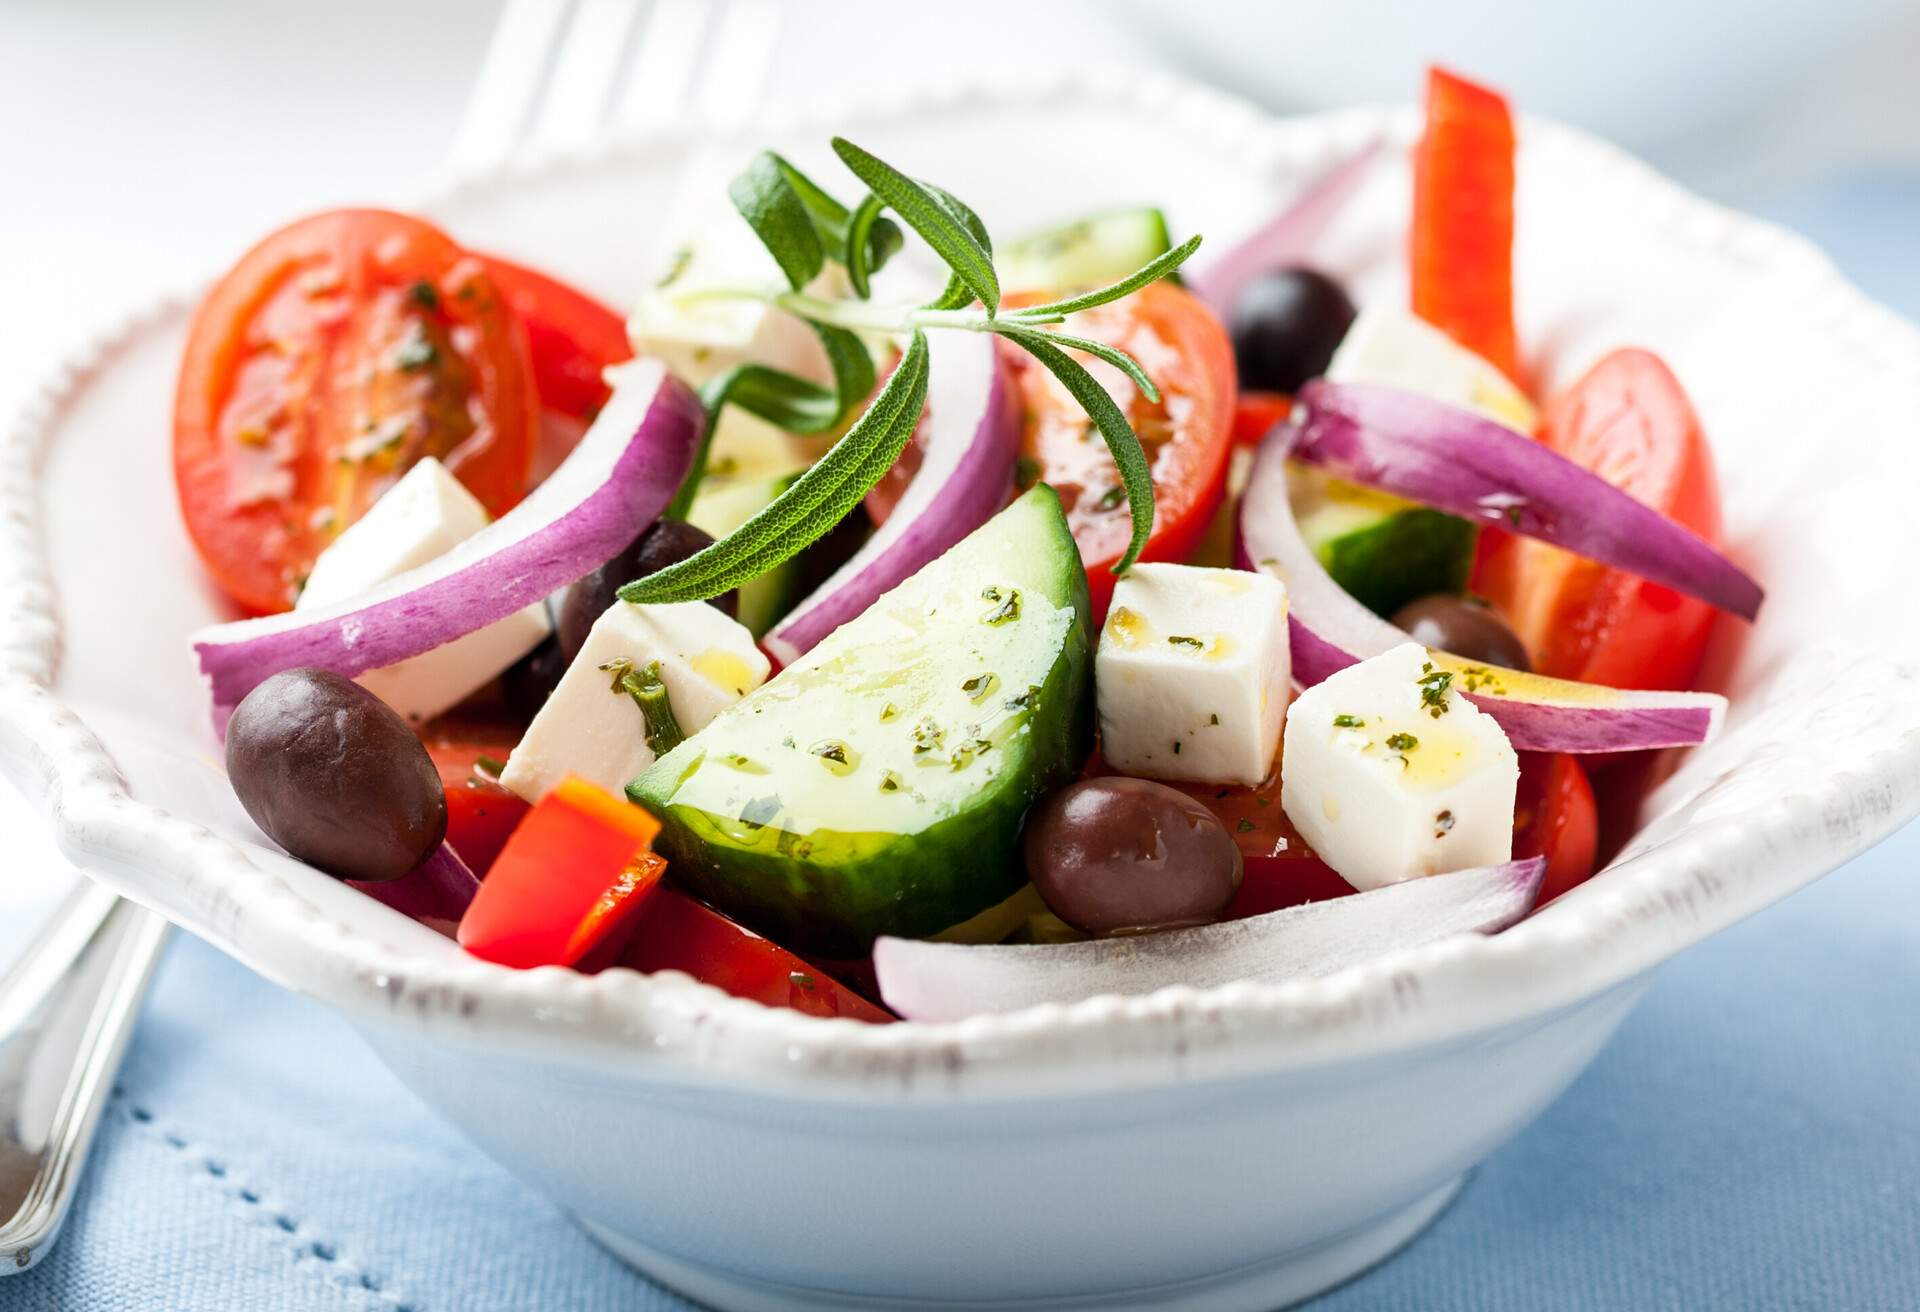 Greek salad with feta cheese, cherry tomatoes, red pepper, black and kalamata olives, cucumber, spices and fresh rosemary. Symbolic image. Concept for a tasty and healthy meal. Close .up.; Shutterstock ID 101098402; Purpose: product; Brand (KAYAK, Momondo, Any): any